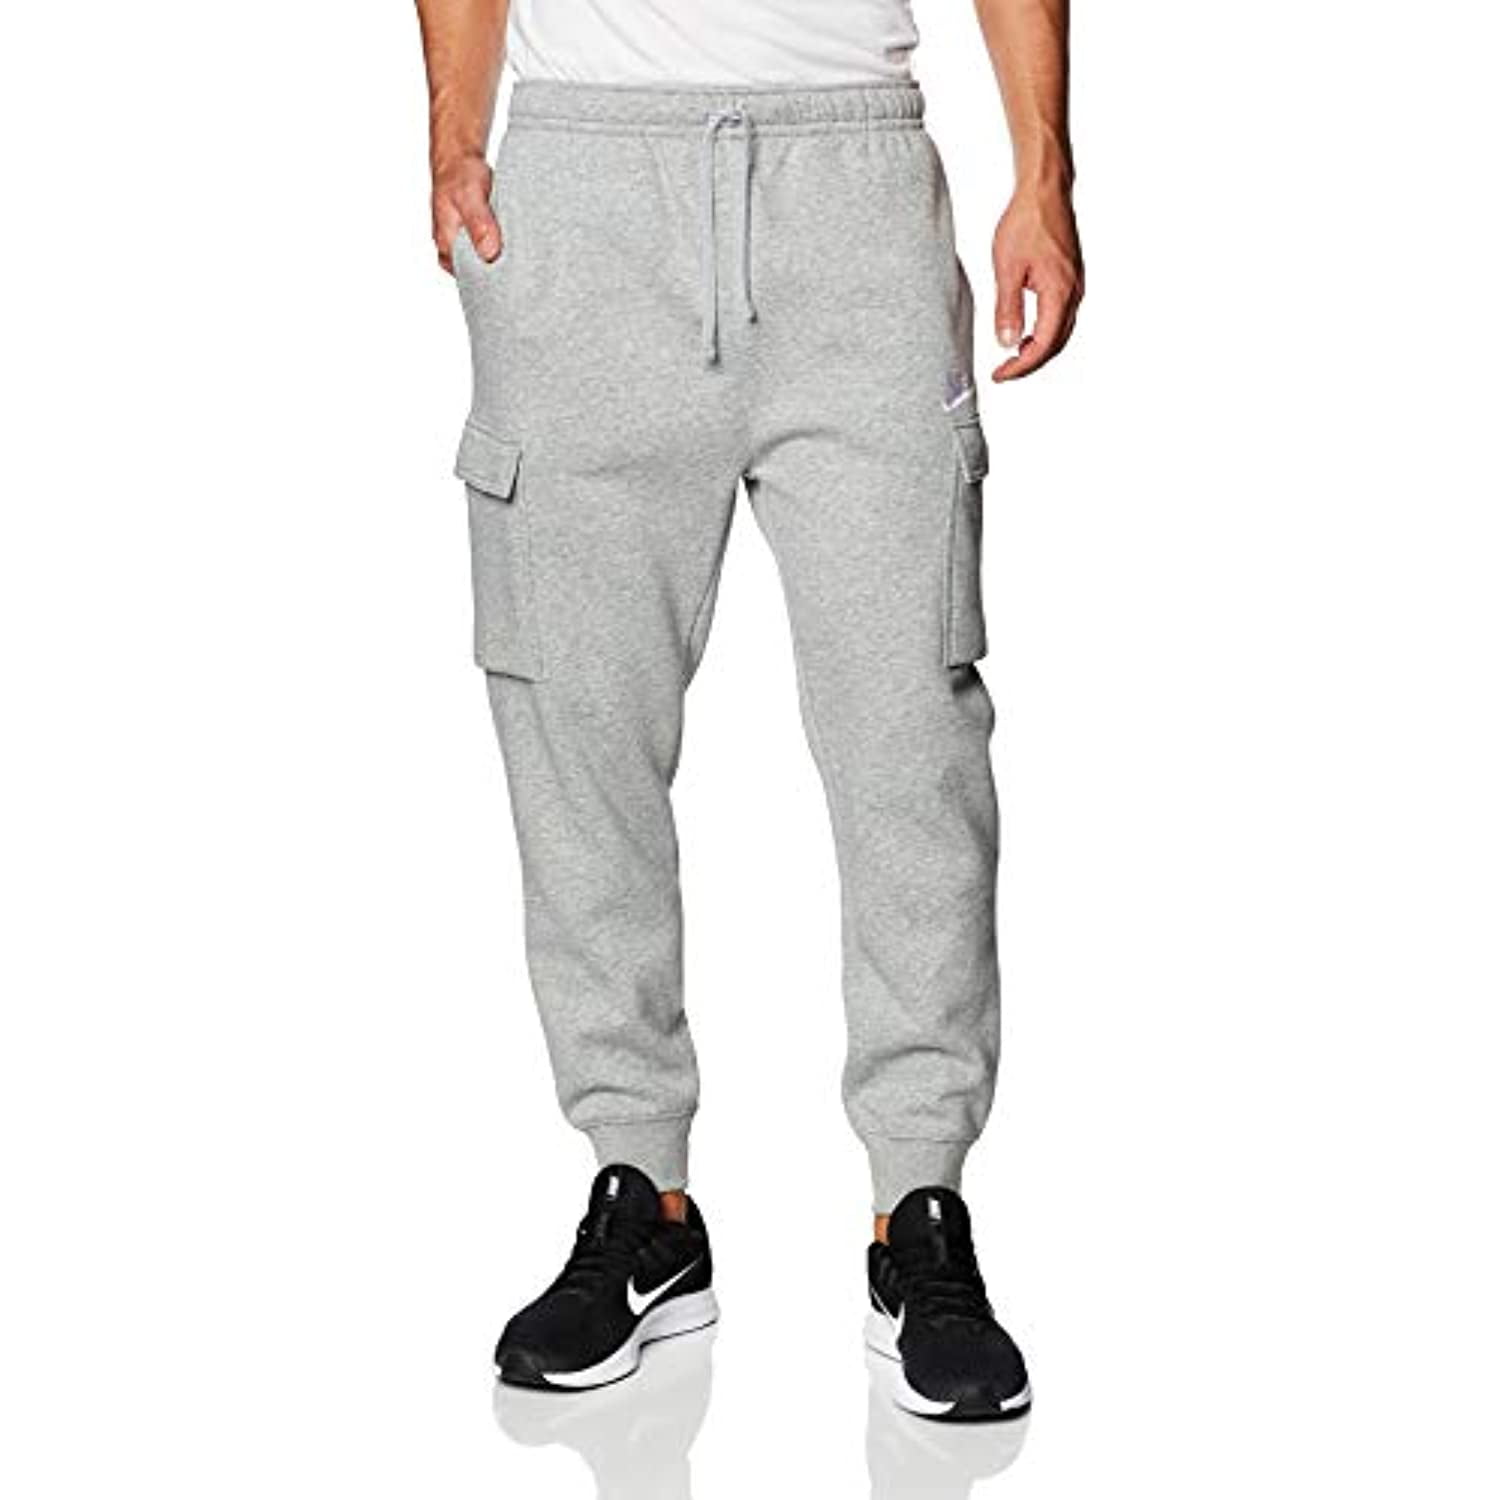 nike grey cargo sweatpants - OFF-61% >Free Delivery